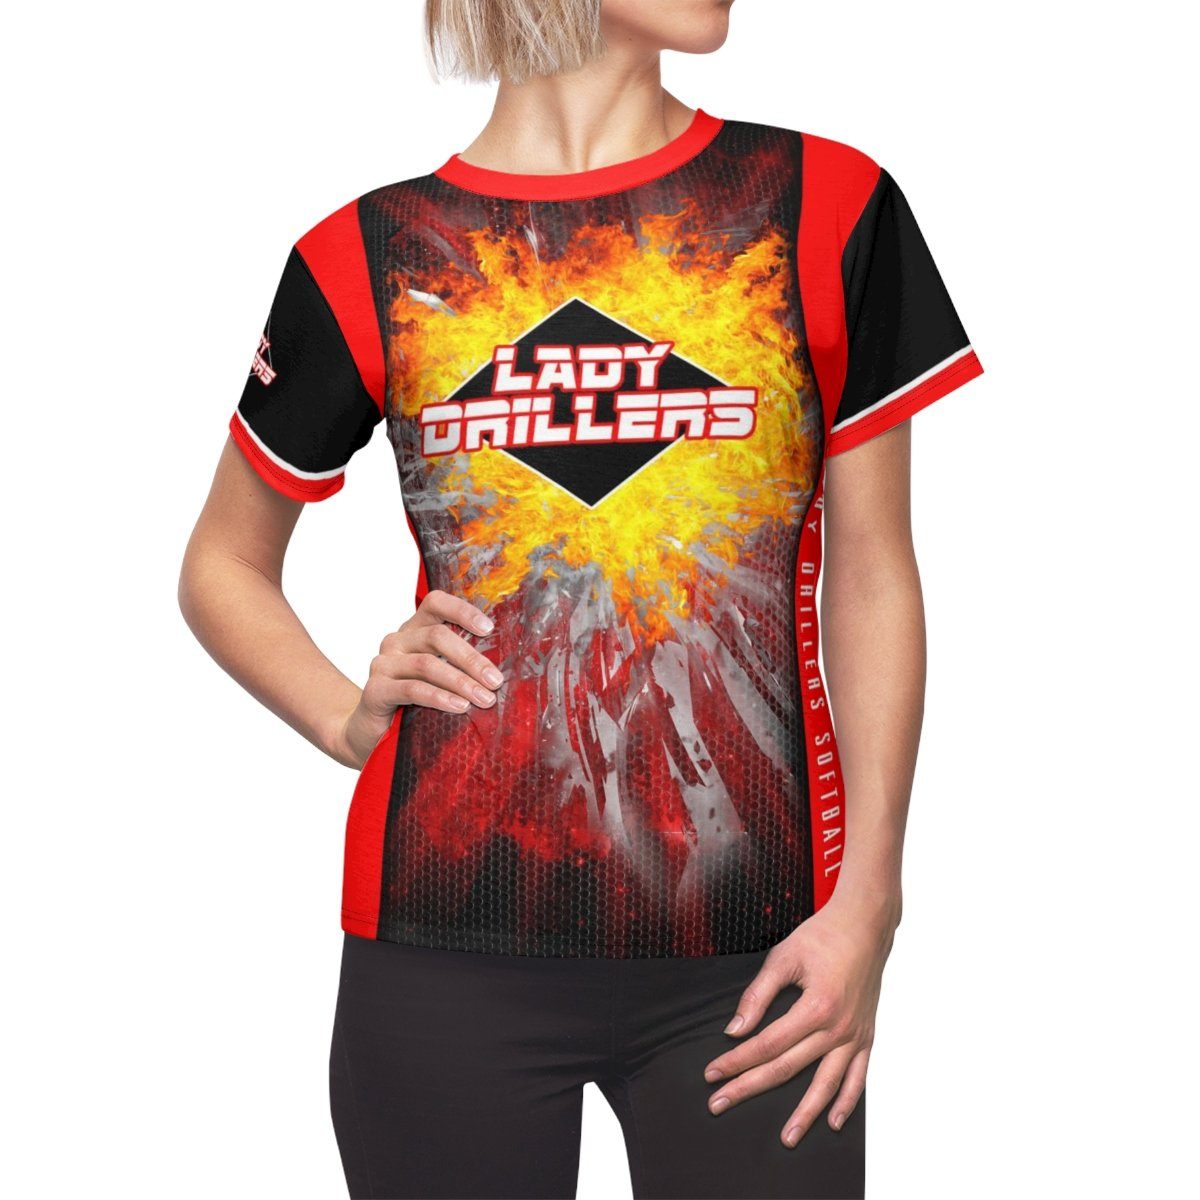 Mesh - V.3 - Extreme Sportswear Women's Cut & Sew Template-Photoshop Template - Photo Solutions